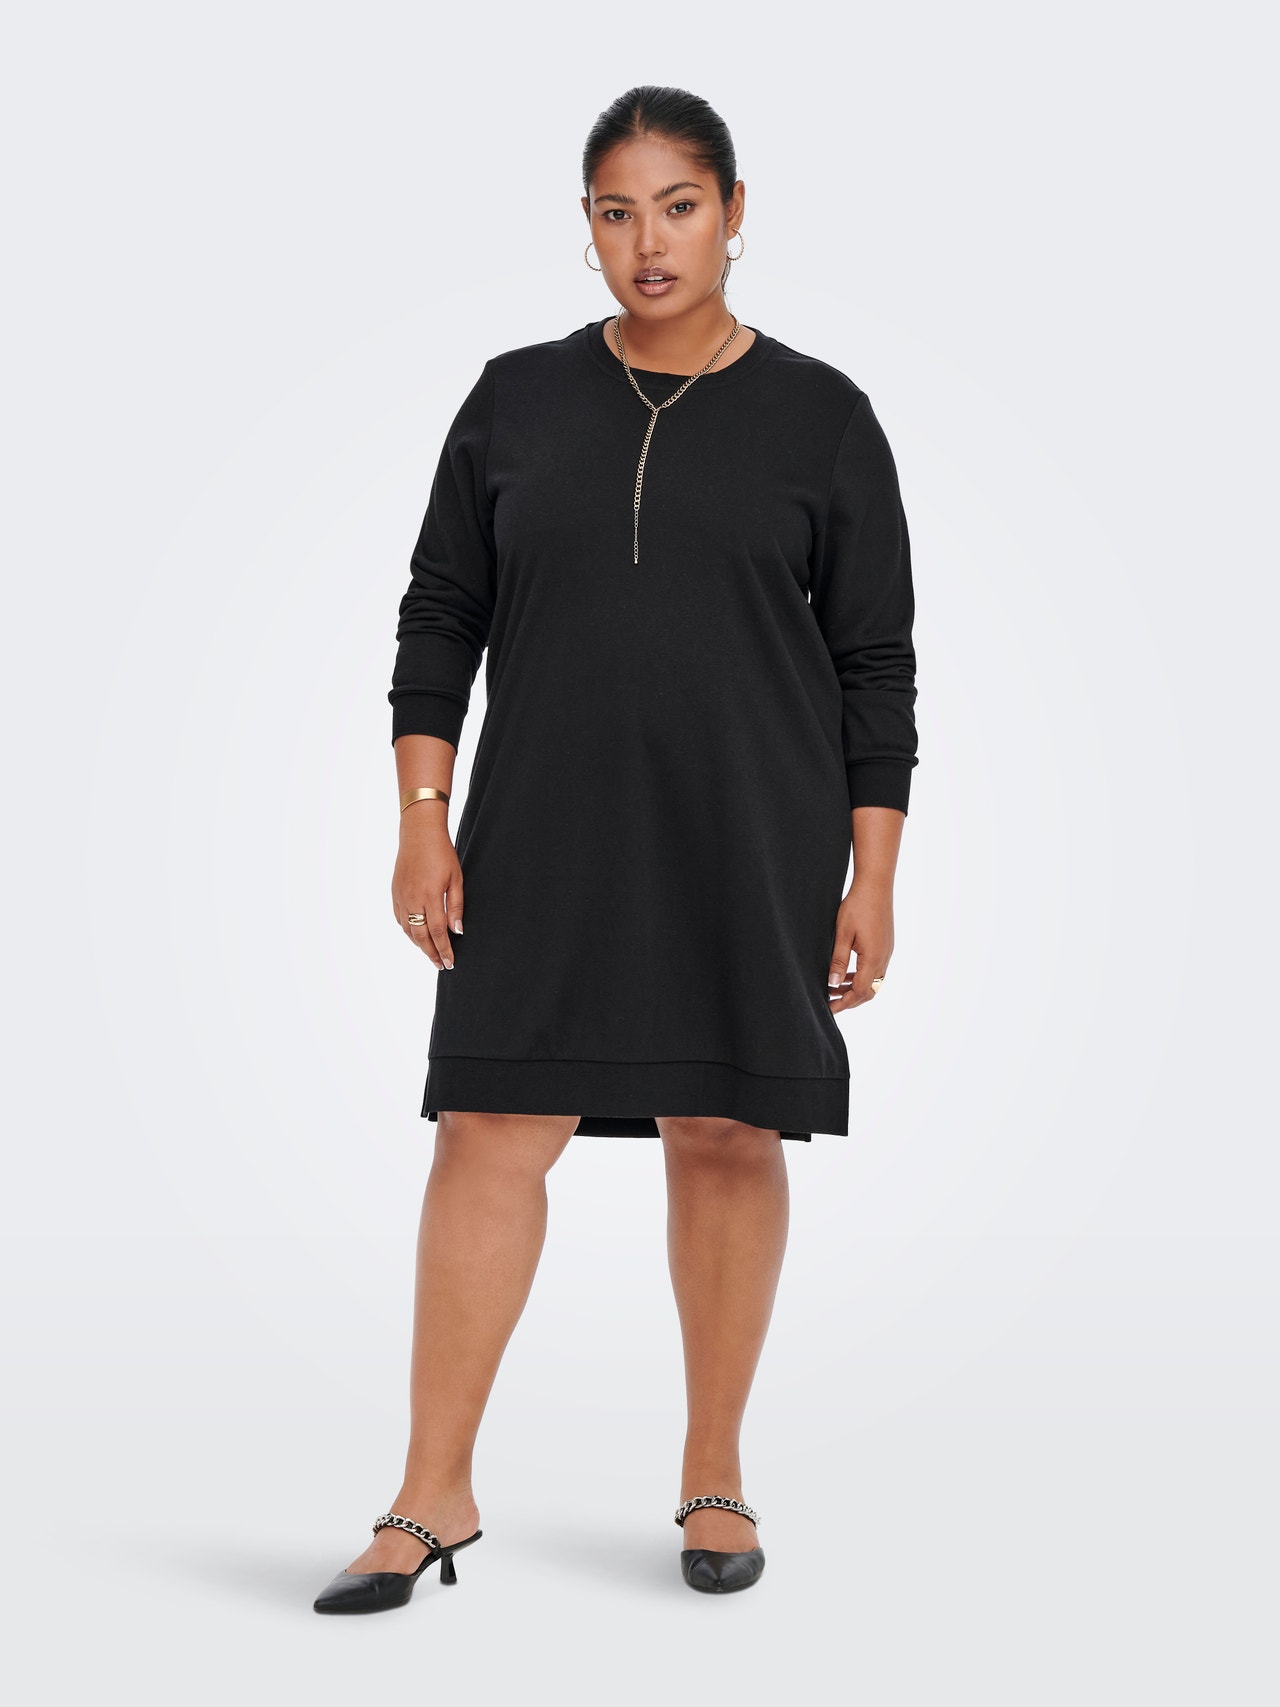 ONLY Robe longue Oversize Fit Col rond -Black - 15241143